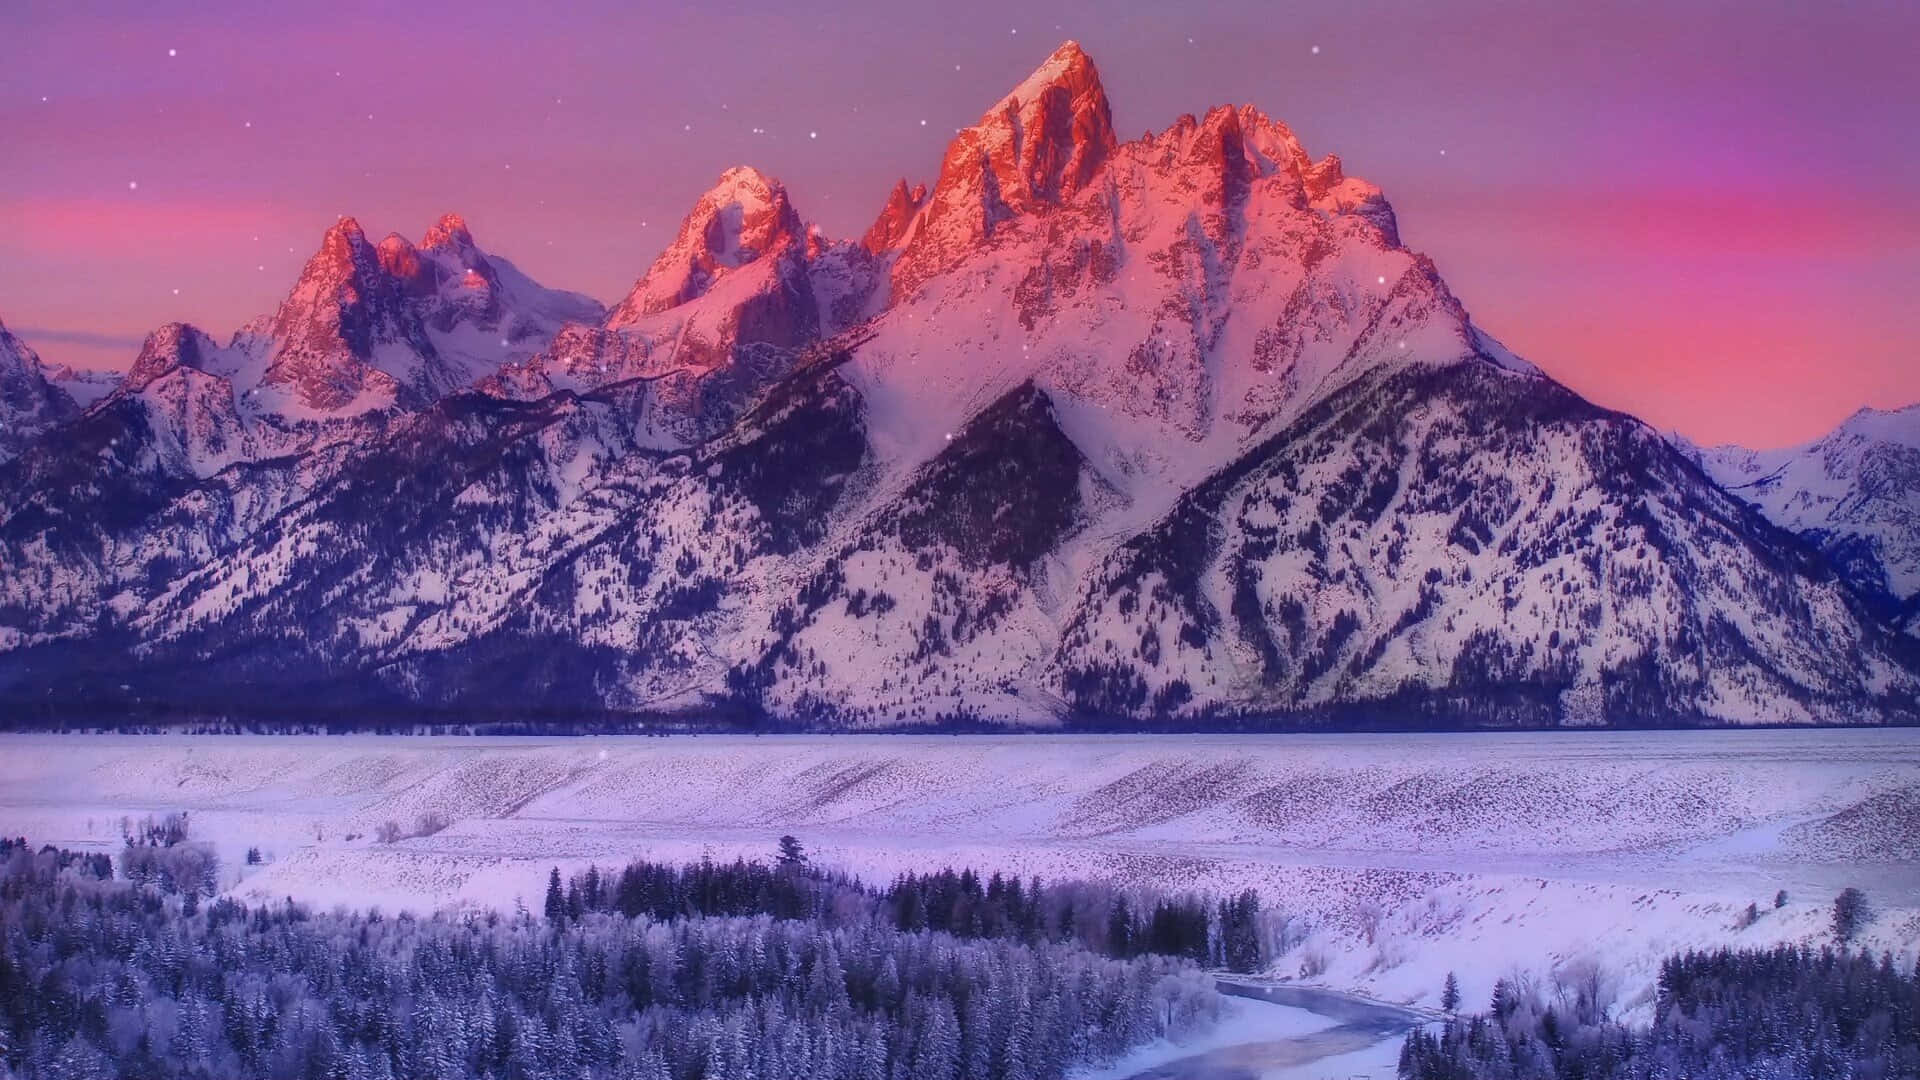 "Take in the beauty of nature by enjoying the stunning mountain scenes." Wallpaper